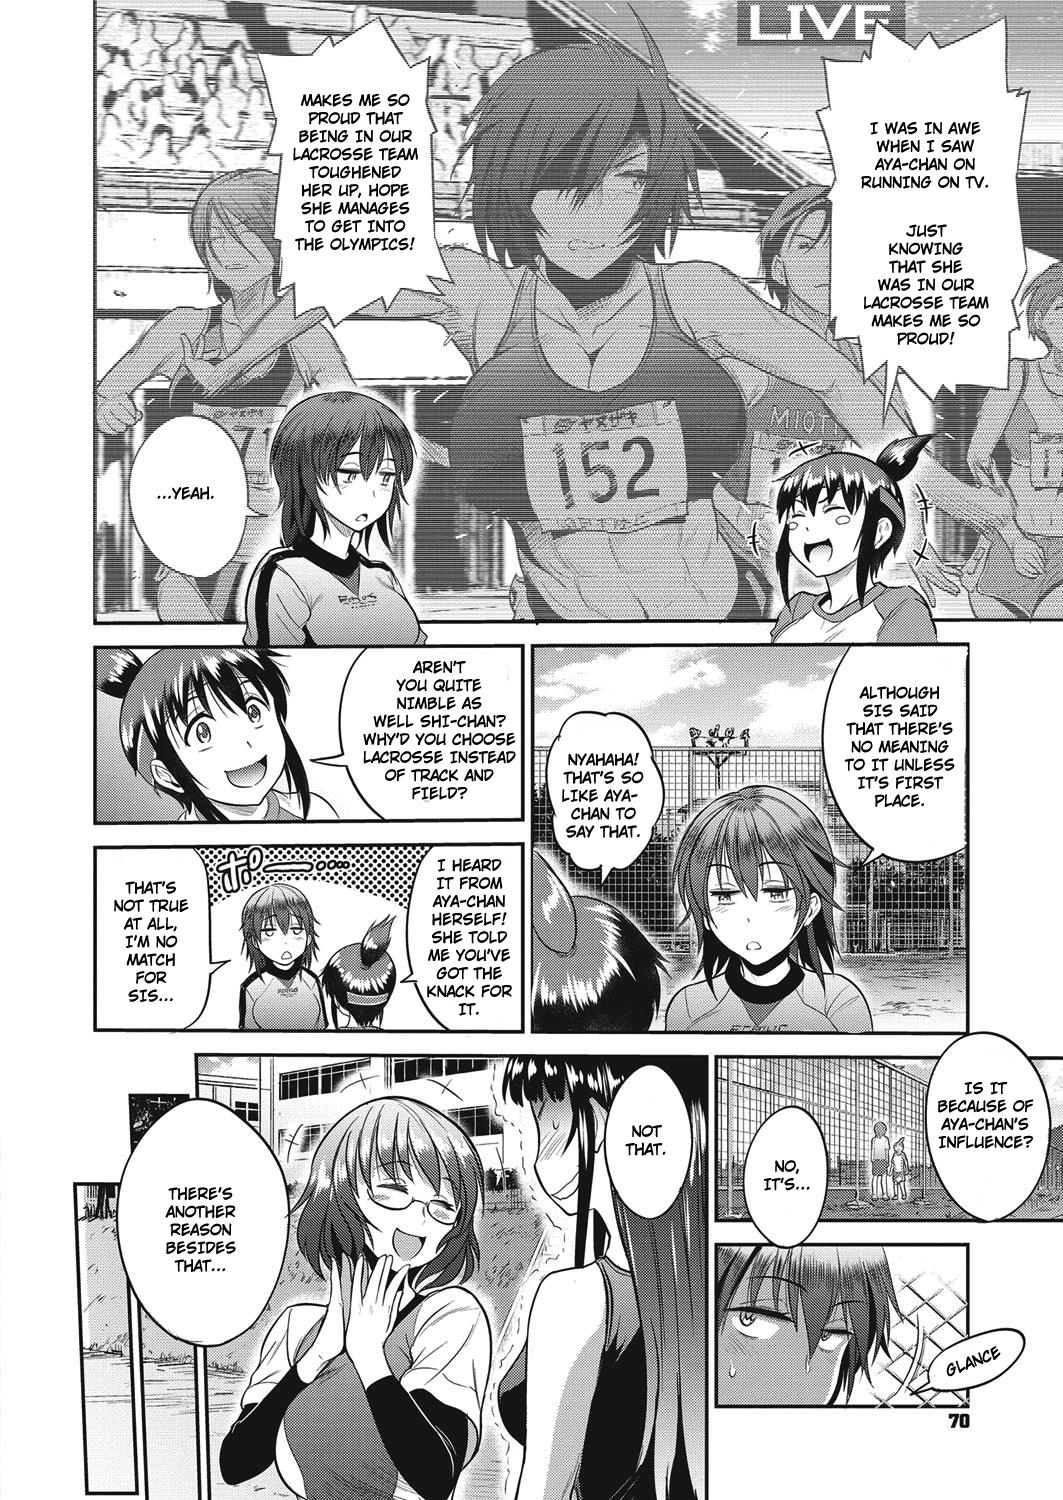 Sex Tape [DISTANCE] Joshi Lacu! - Girls Lacrosse Club ~2 Years Later~ Ch. 3 (COMIC ExE 04) [English] [TripleSevenScans] [Digital] Oiled - Page 12